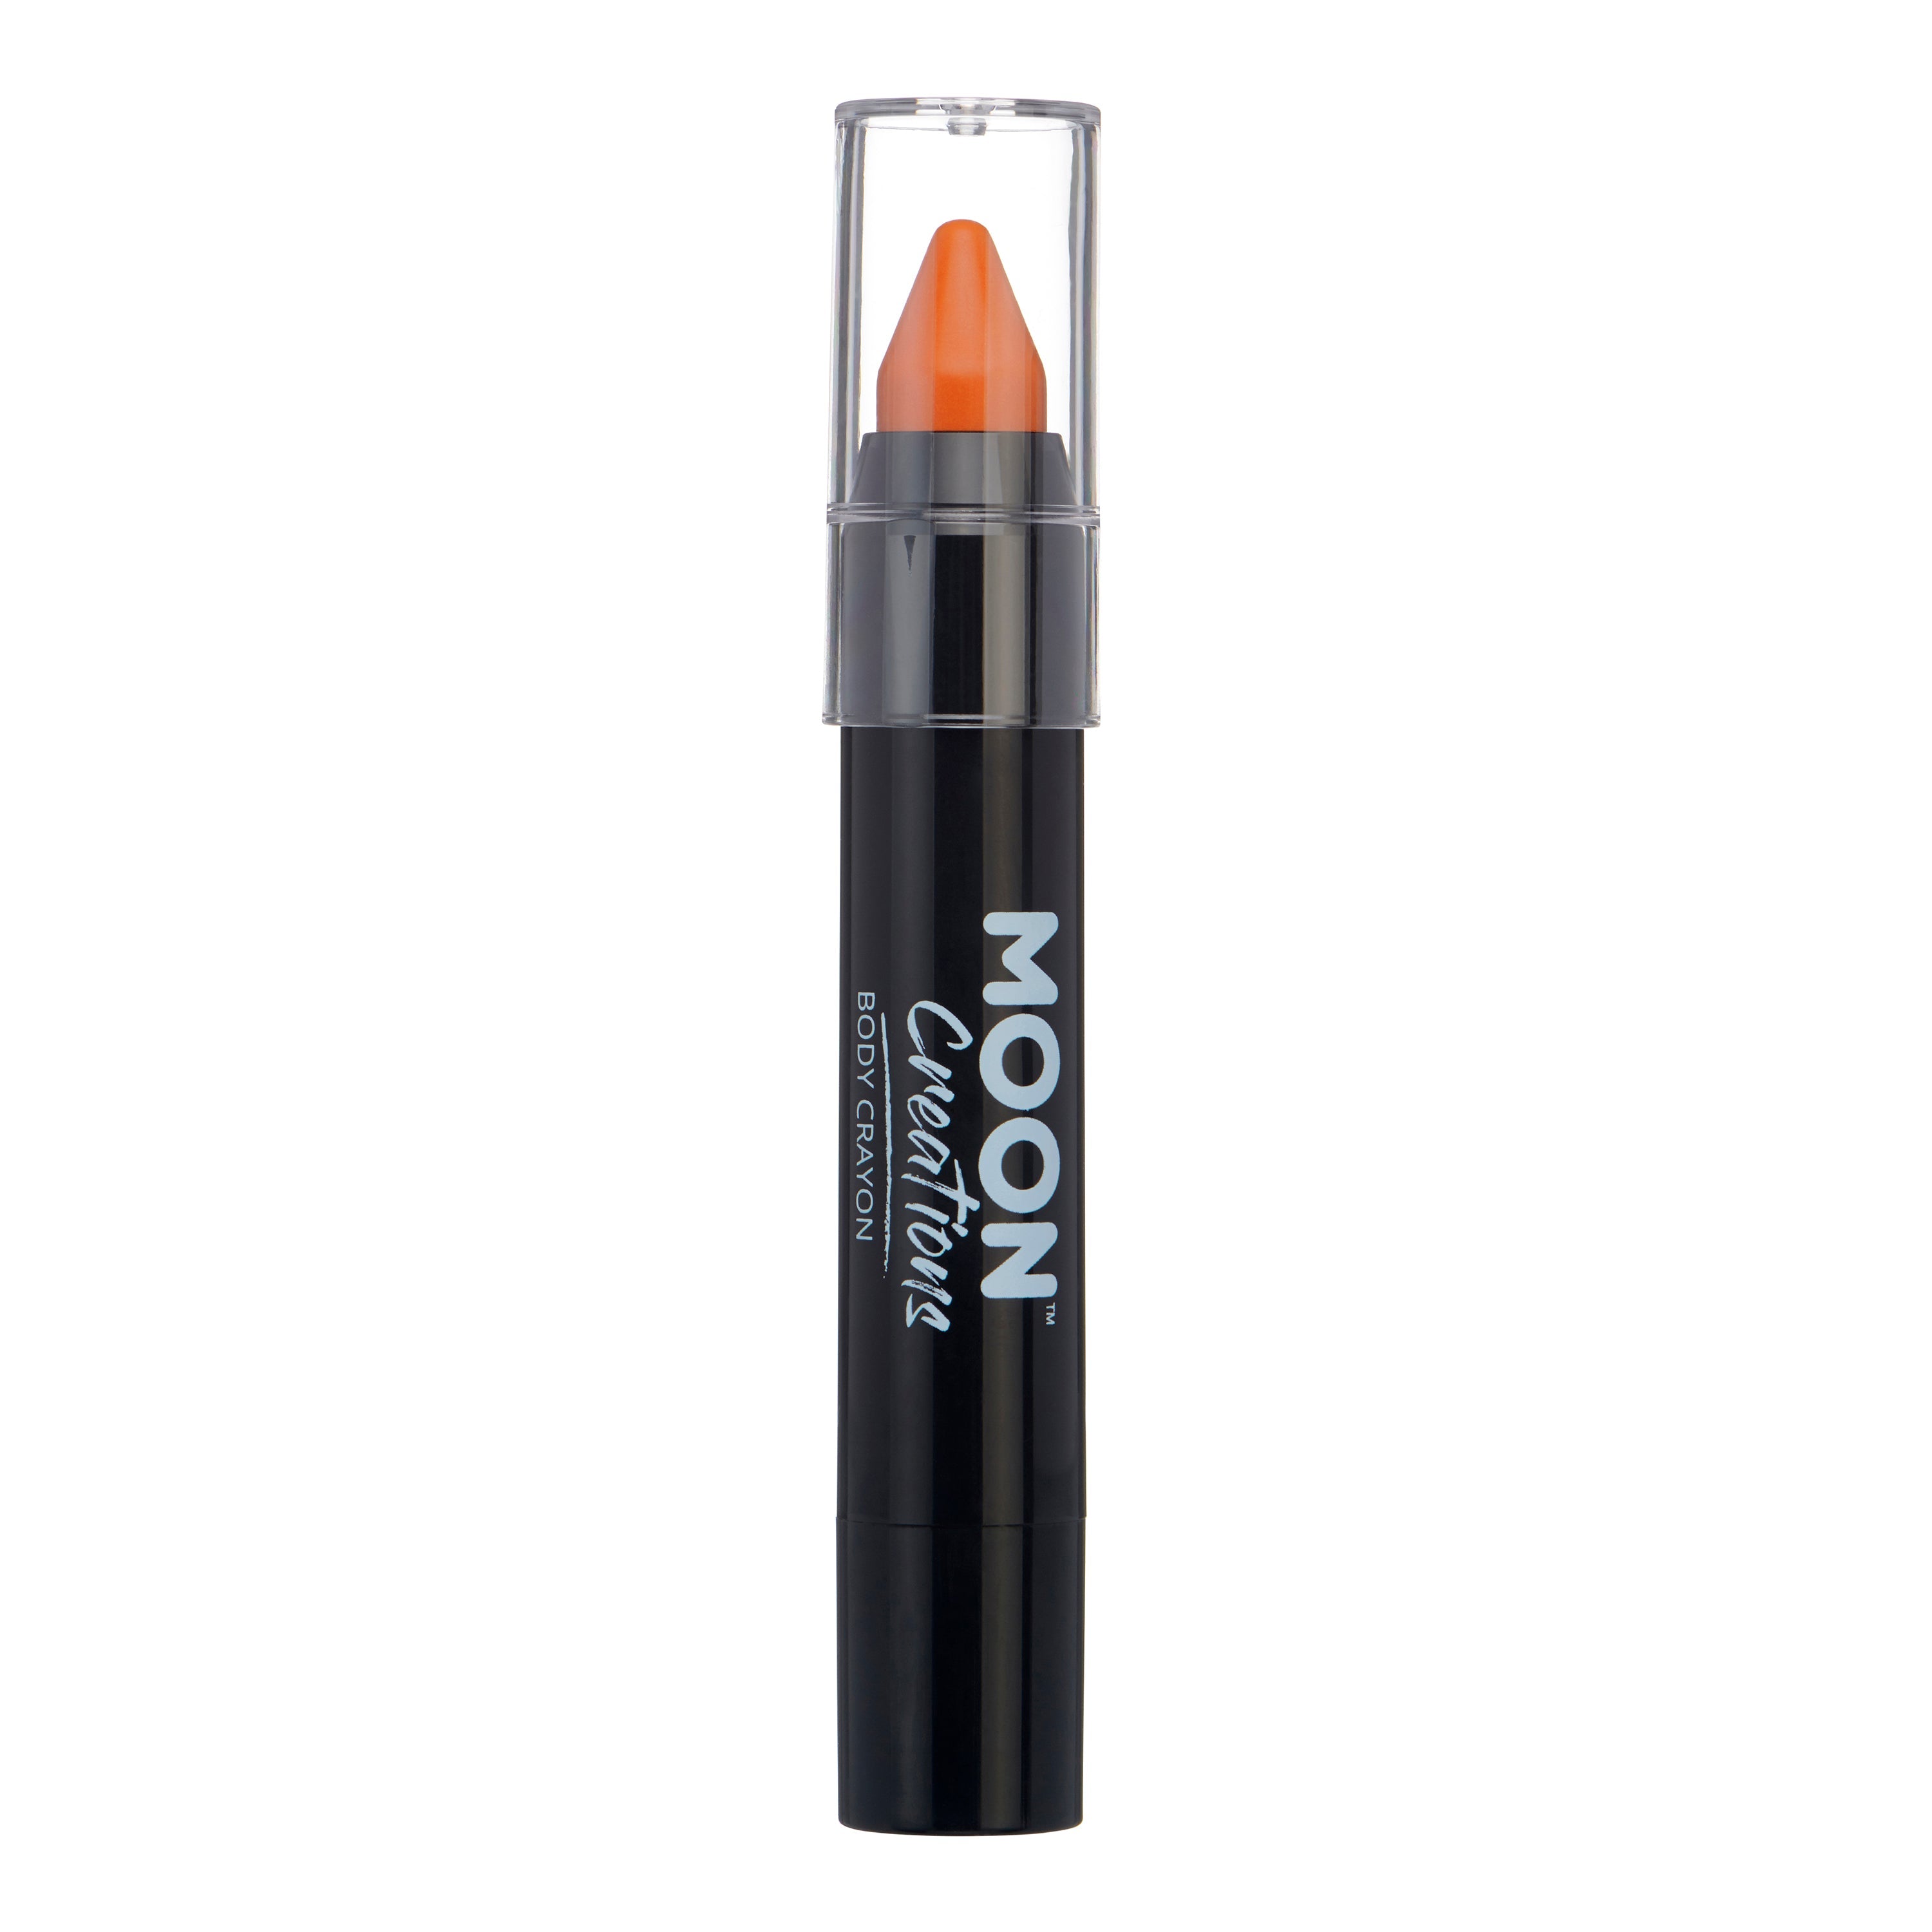 Orange - Face & Body Paint Makeup, 12mL. Cosmetically certified, FDA & Health Canada compliant and cruelty free.